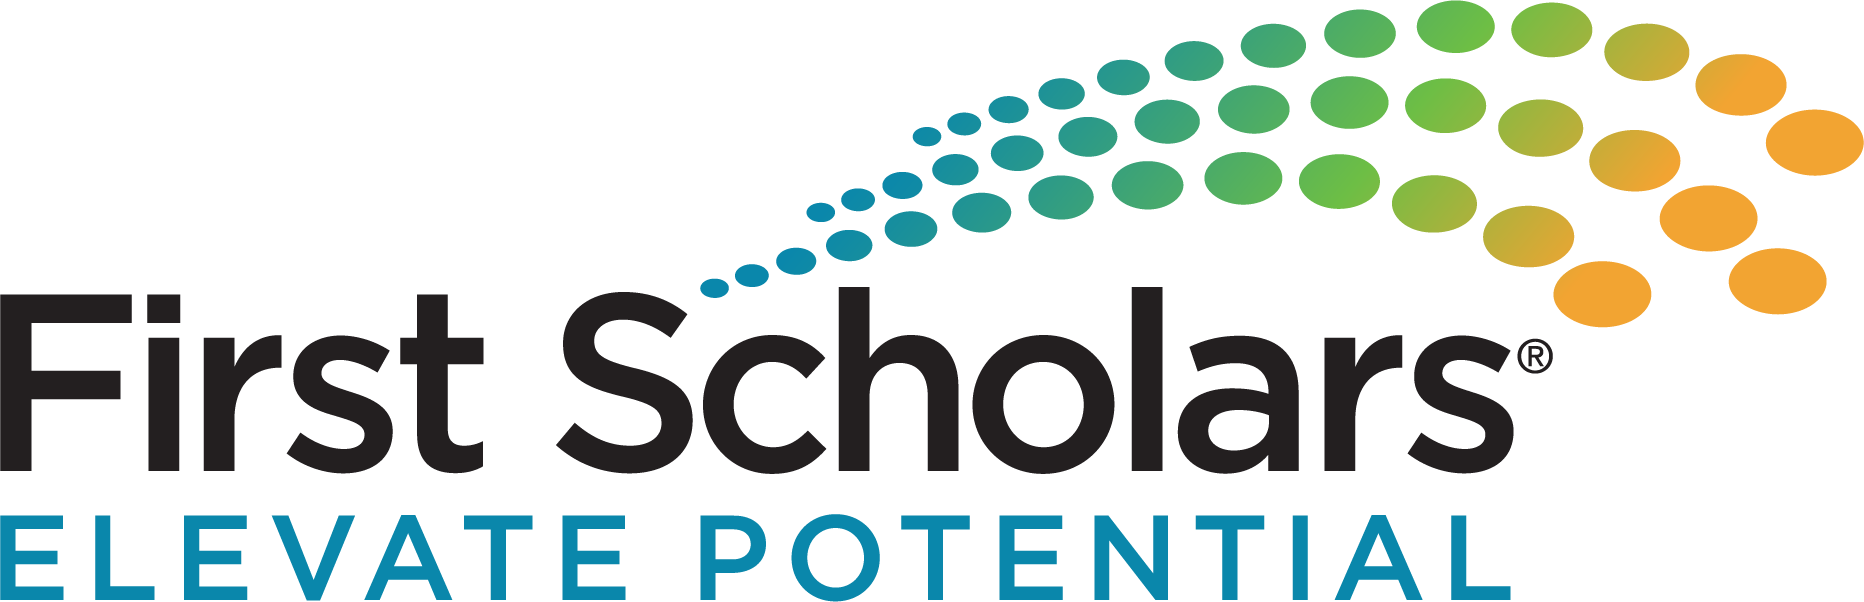 First Scholars Elevate Potential logo